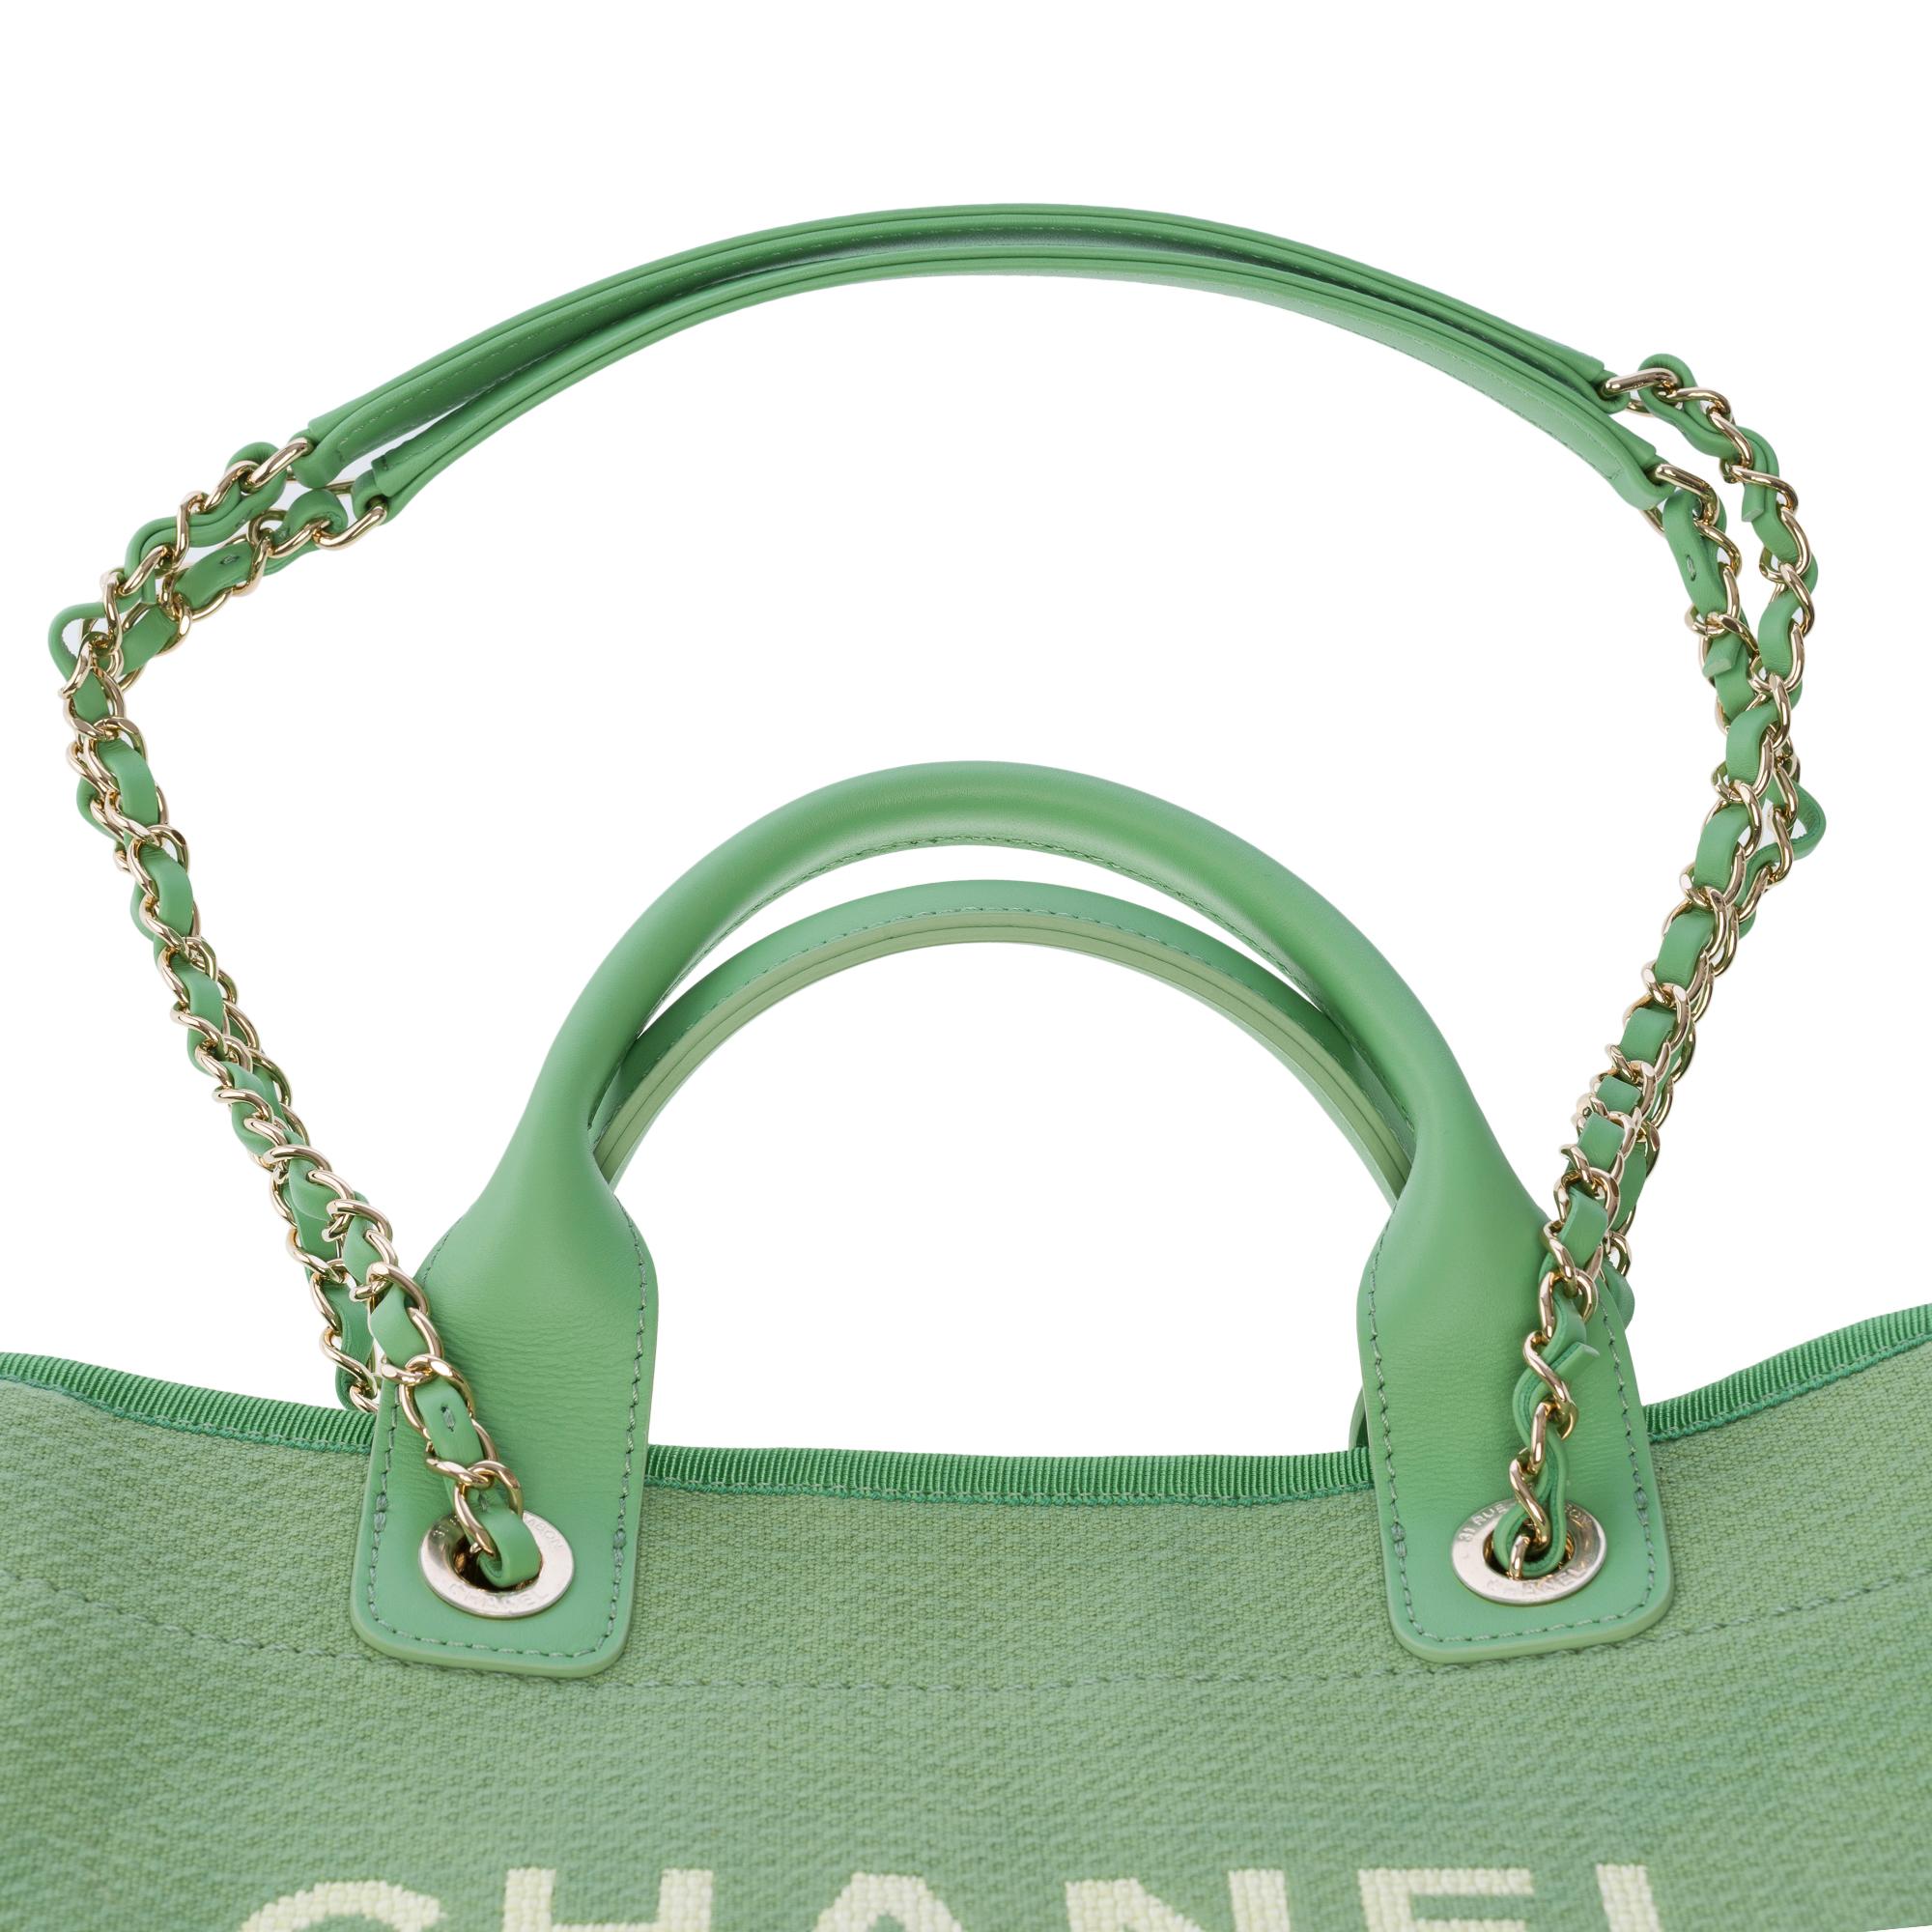 New Amazing limited edition Chanel Deauville Tote bag in Green canvas, SHW For Sale 8